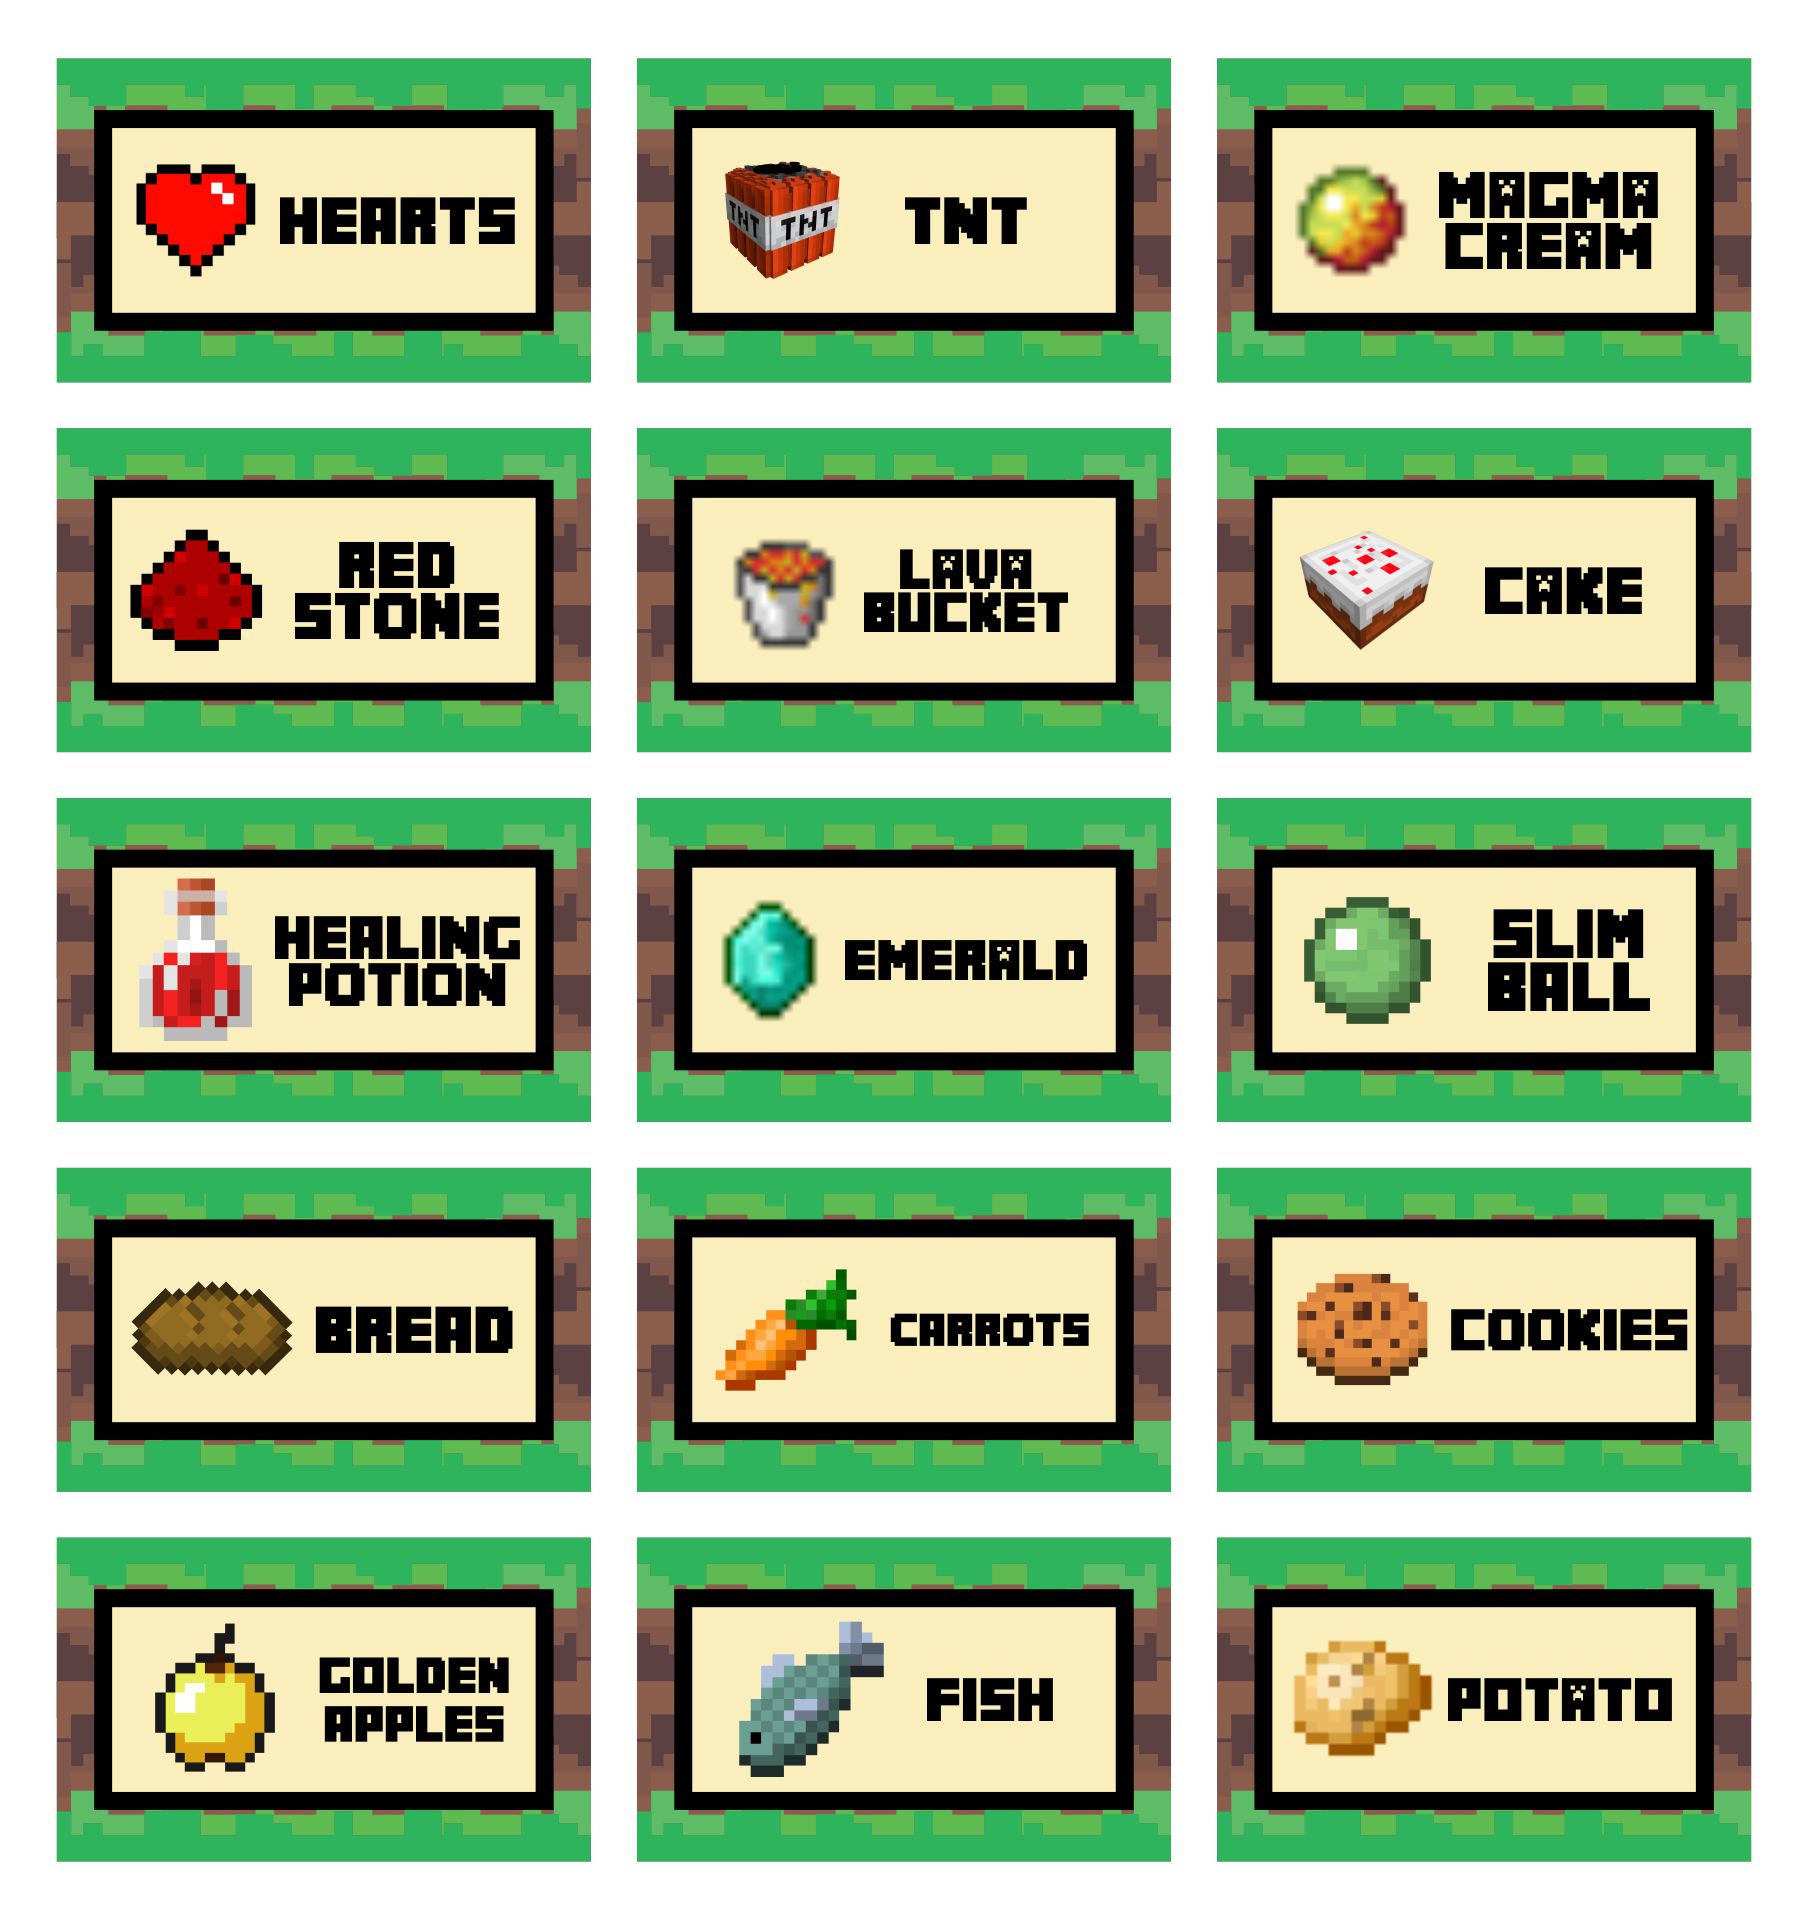 Minecraft Printable Food Tent Cards